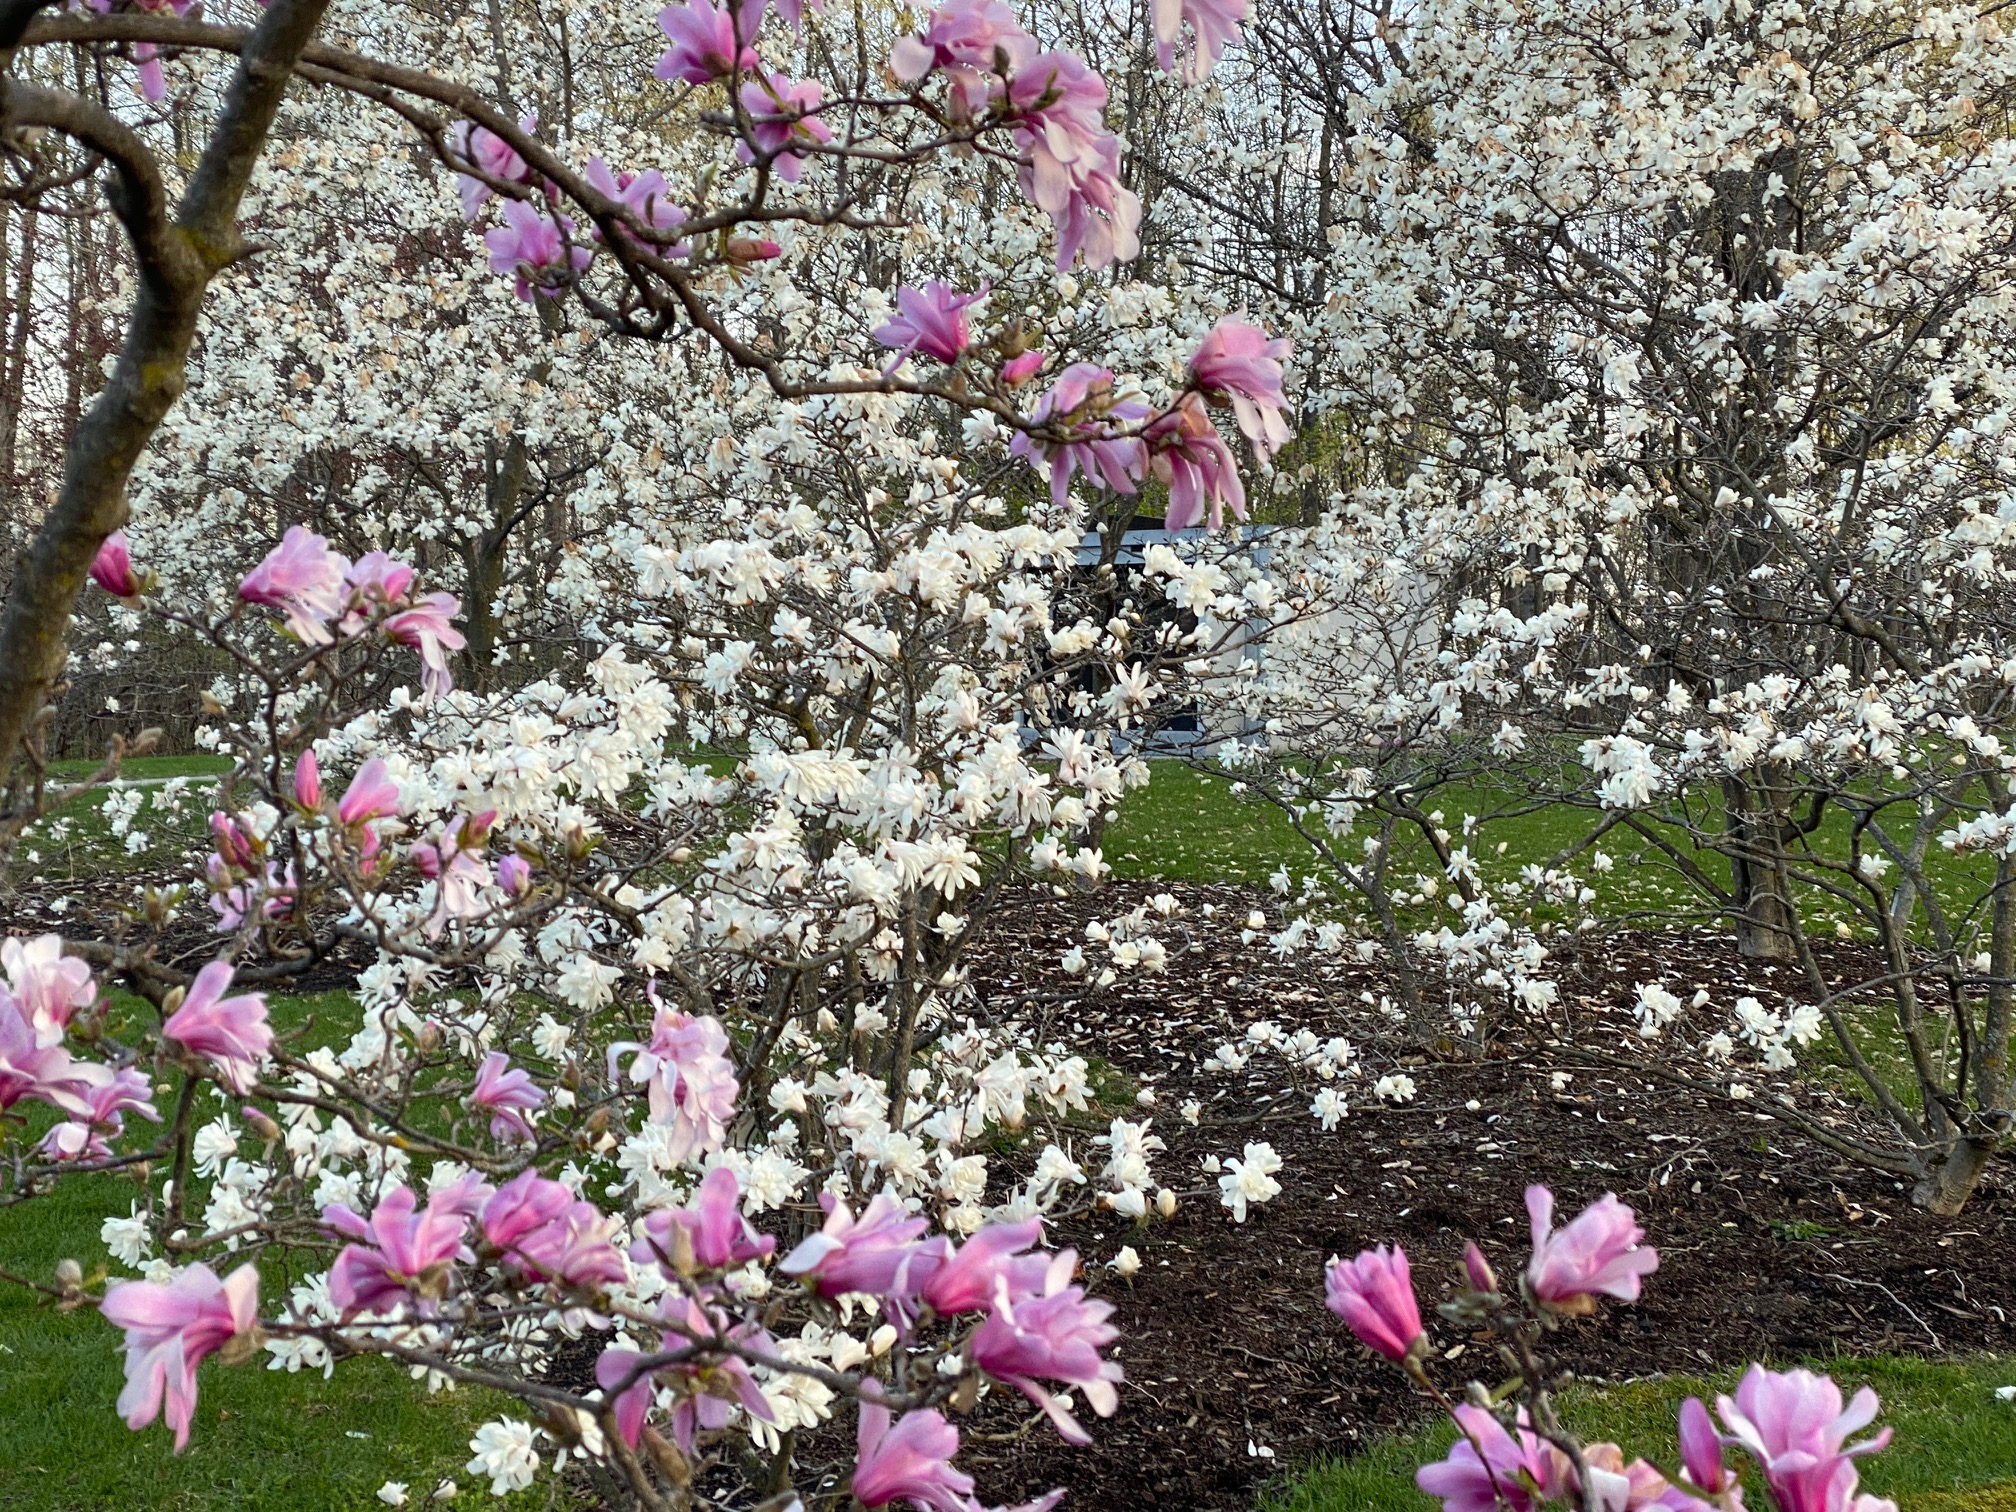 White and pink magnolia flowers blooming in the back of Beechwood's Botanical Gardens